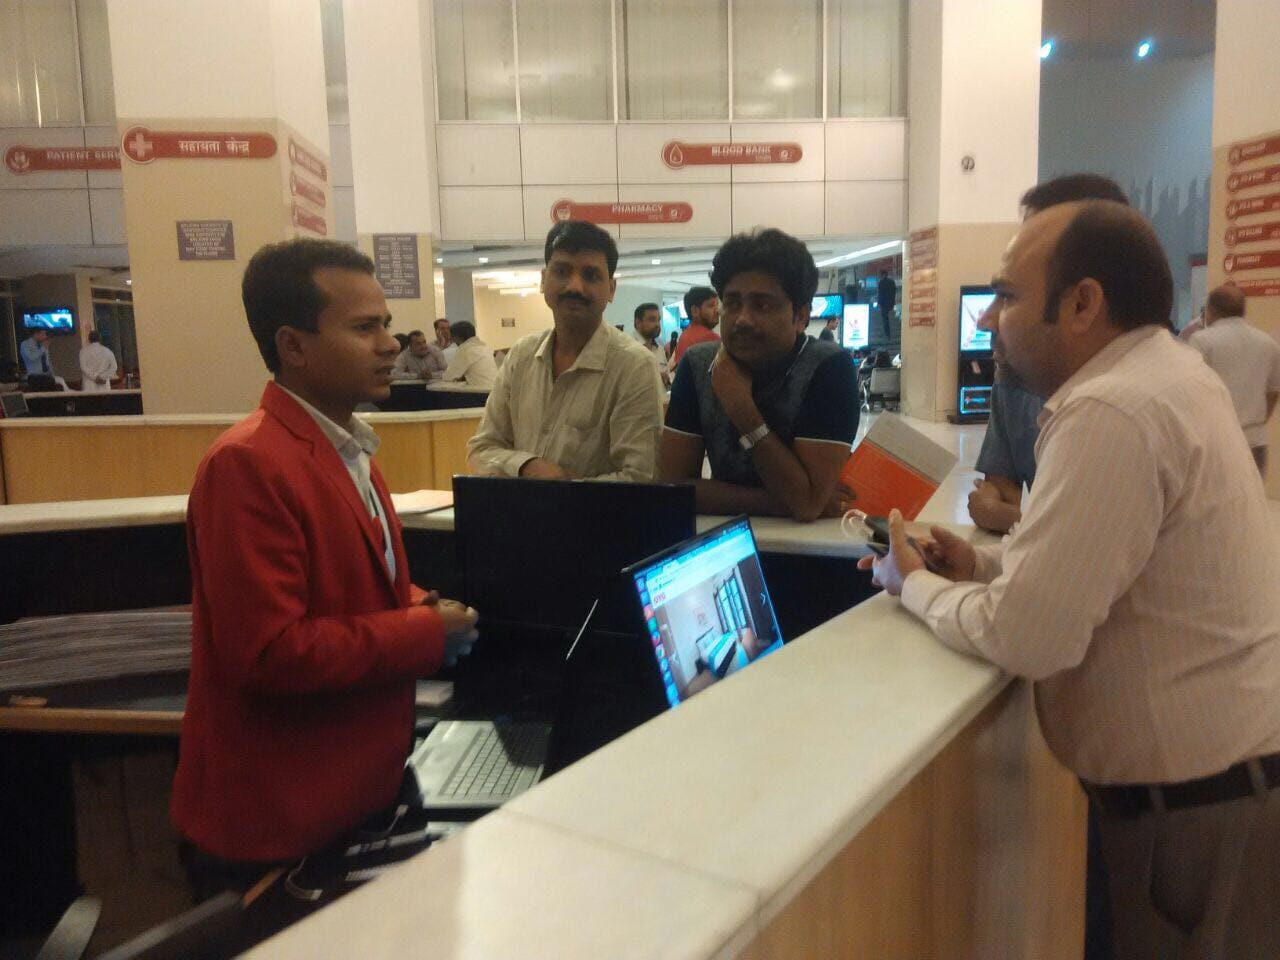 OYO desk at Medanta Hospital for helping people travelling for medical treatment. Now book hotels for our desks at hospitals.